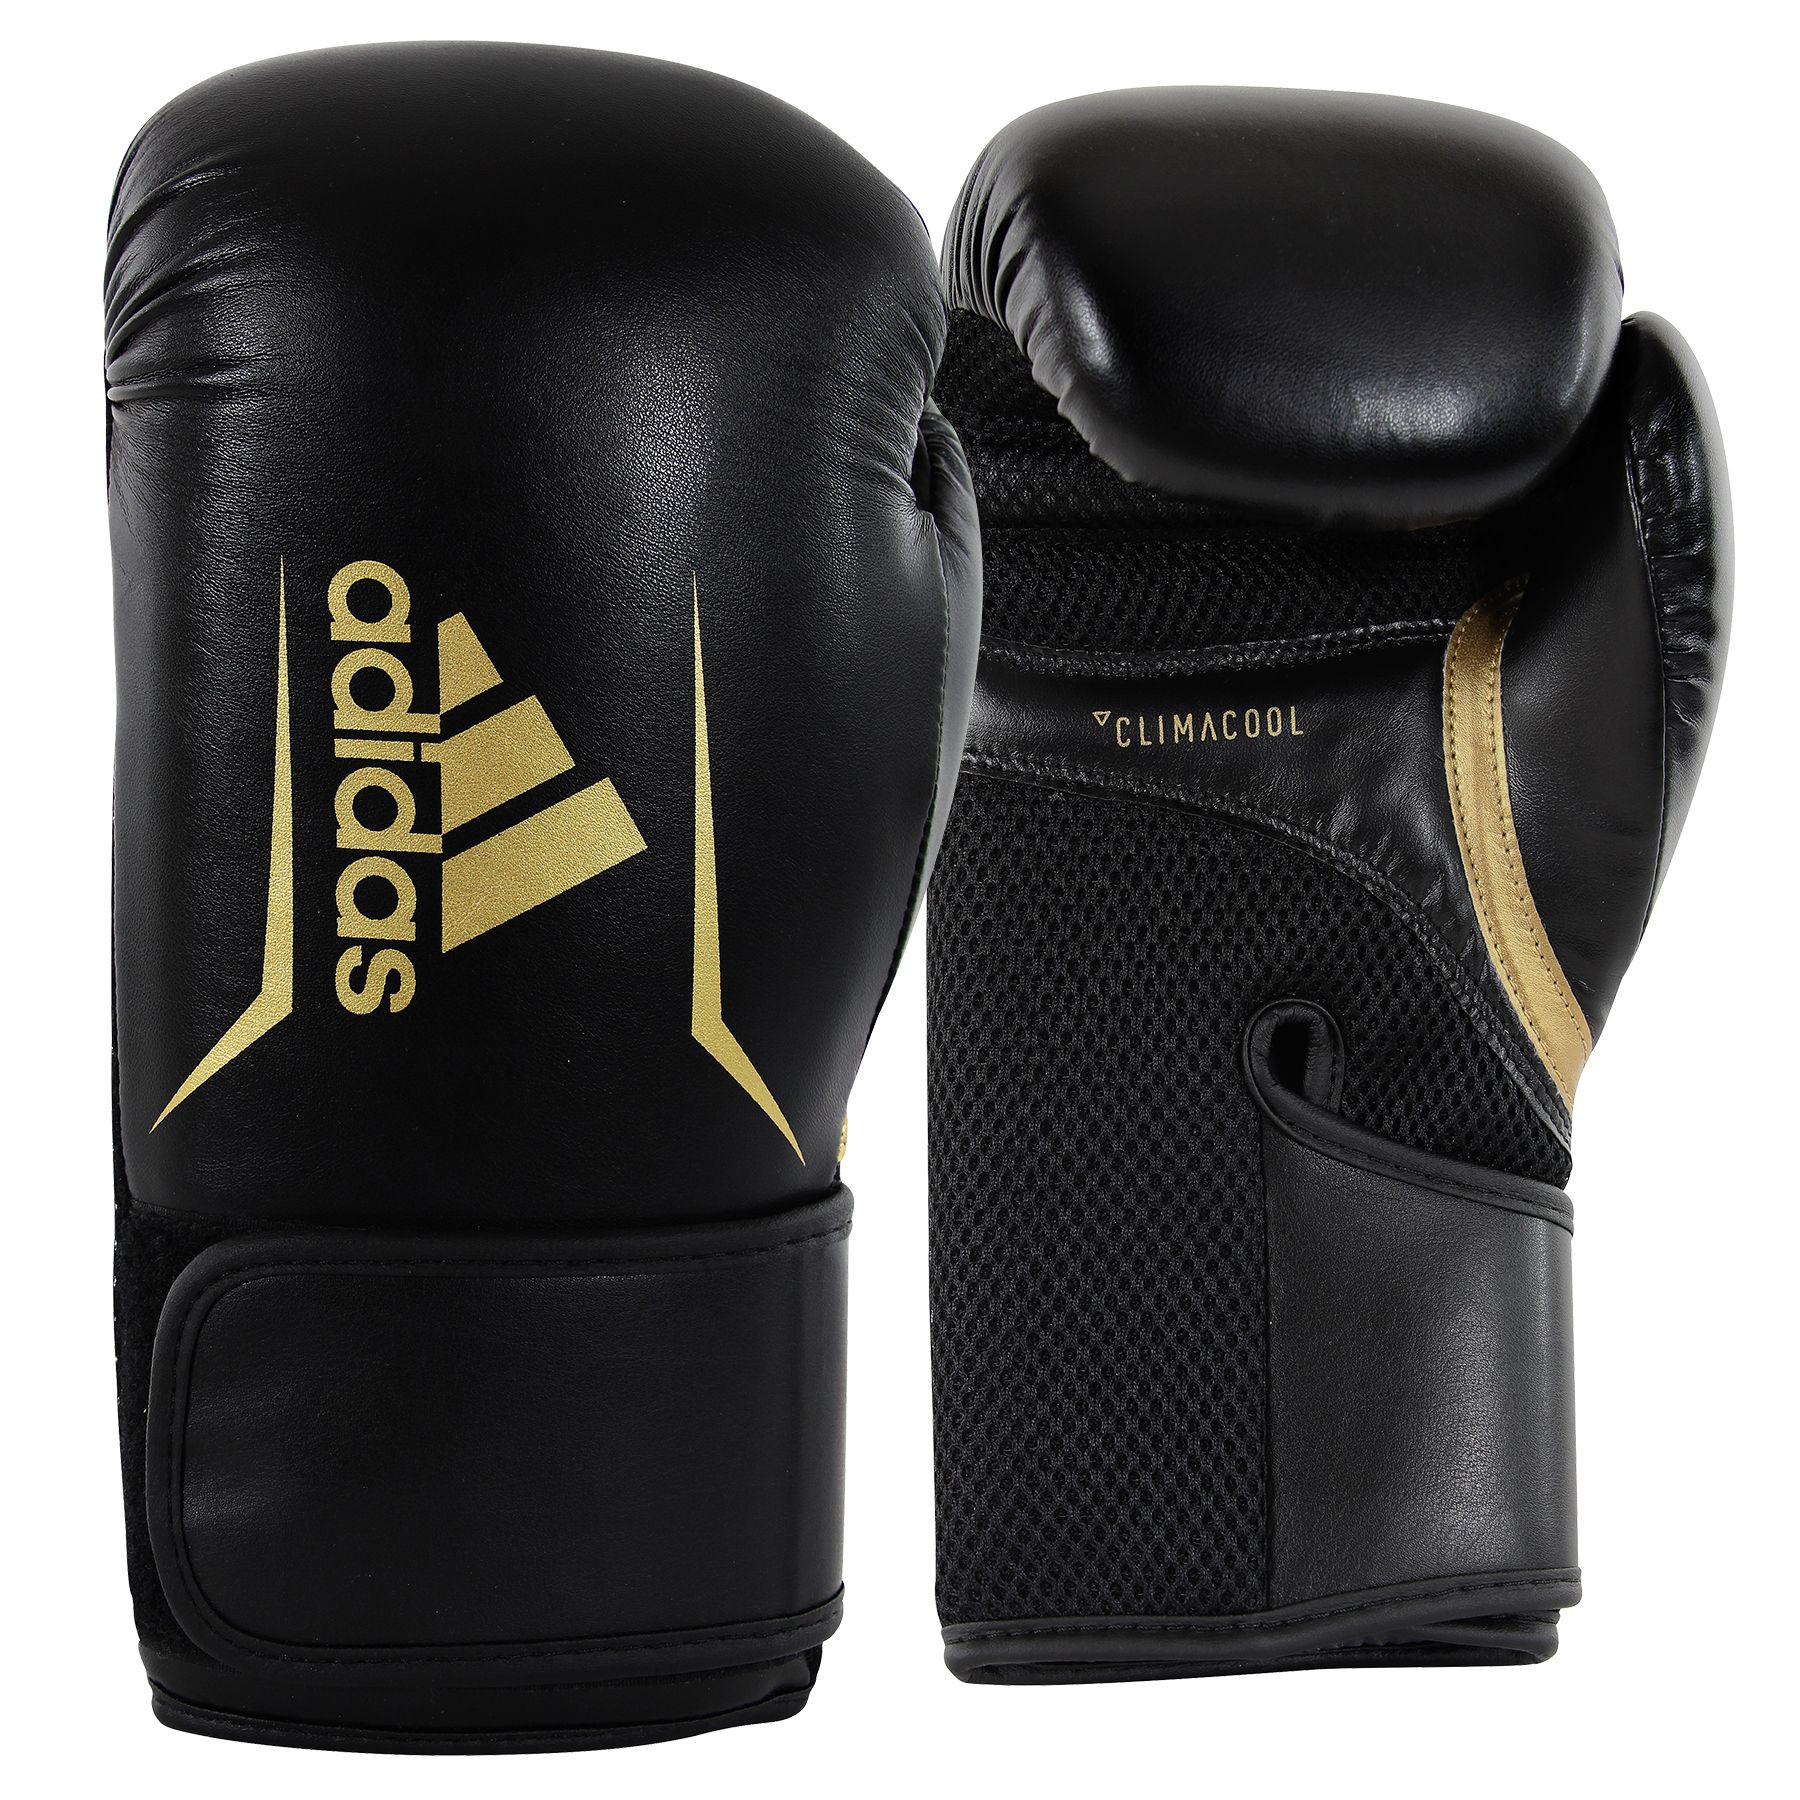 adidas climacool boxing gloves review